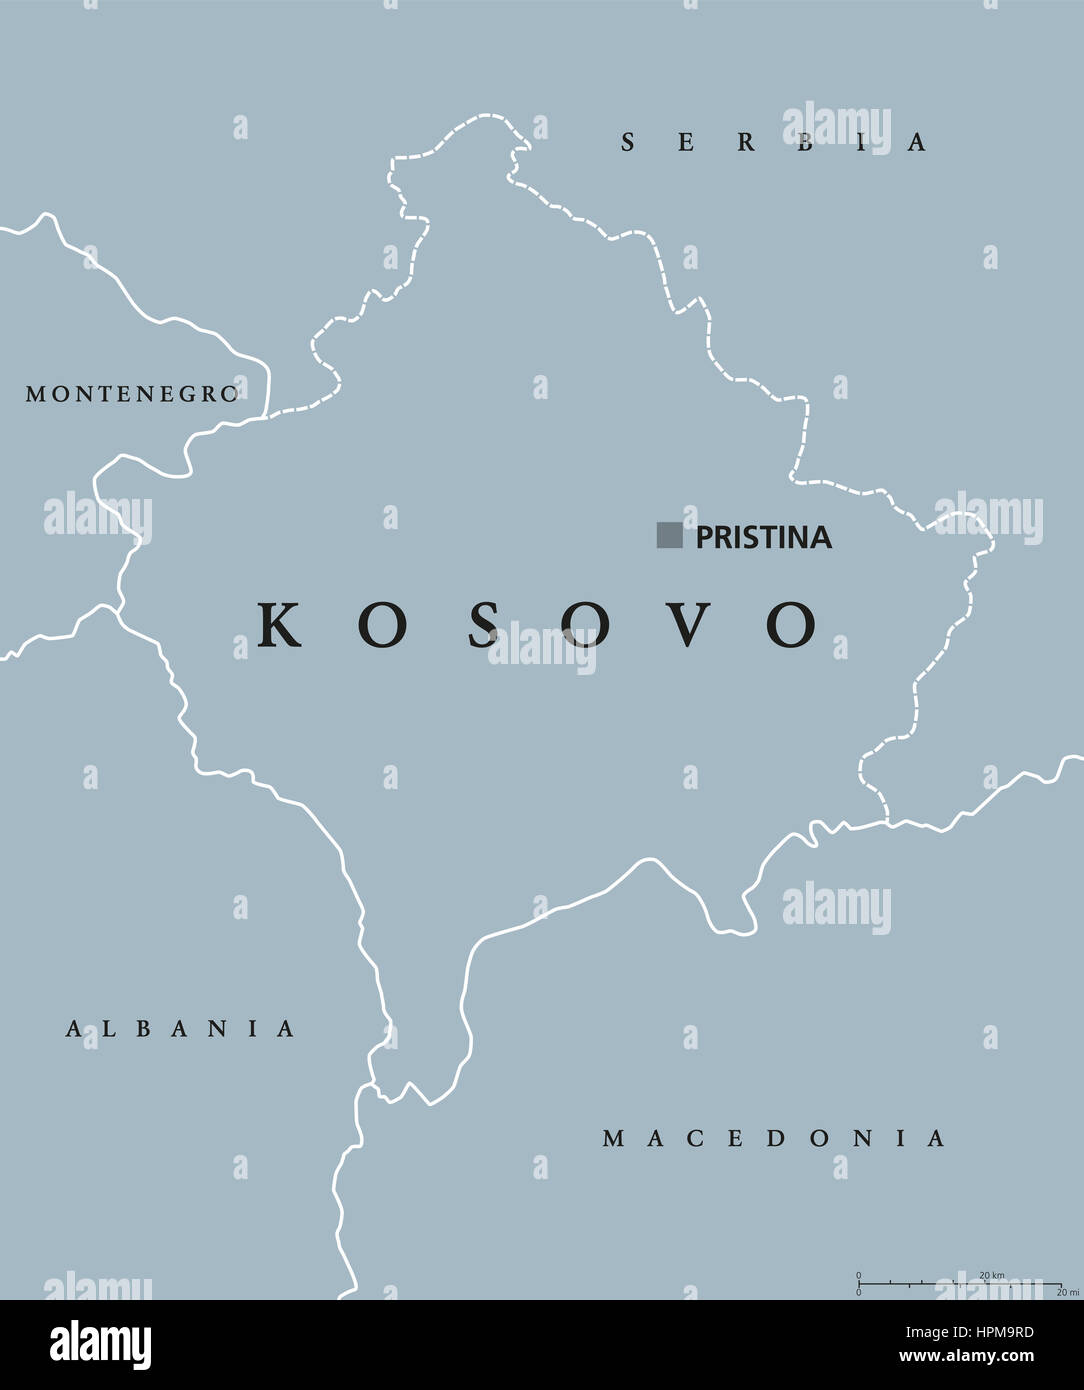 Kosovo political map with capital Pristina, national borders, neighbor countries. Disputed territory, partially recognized state in Europe. Stock Photo